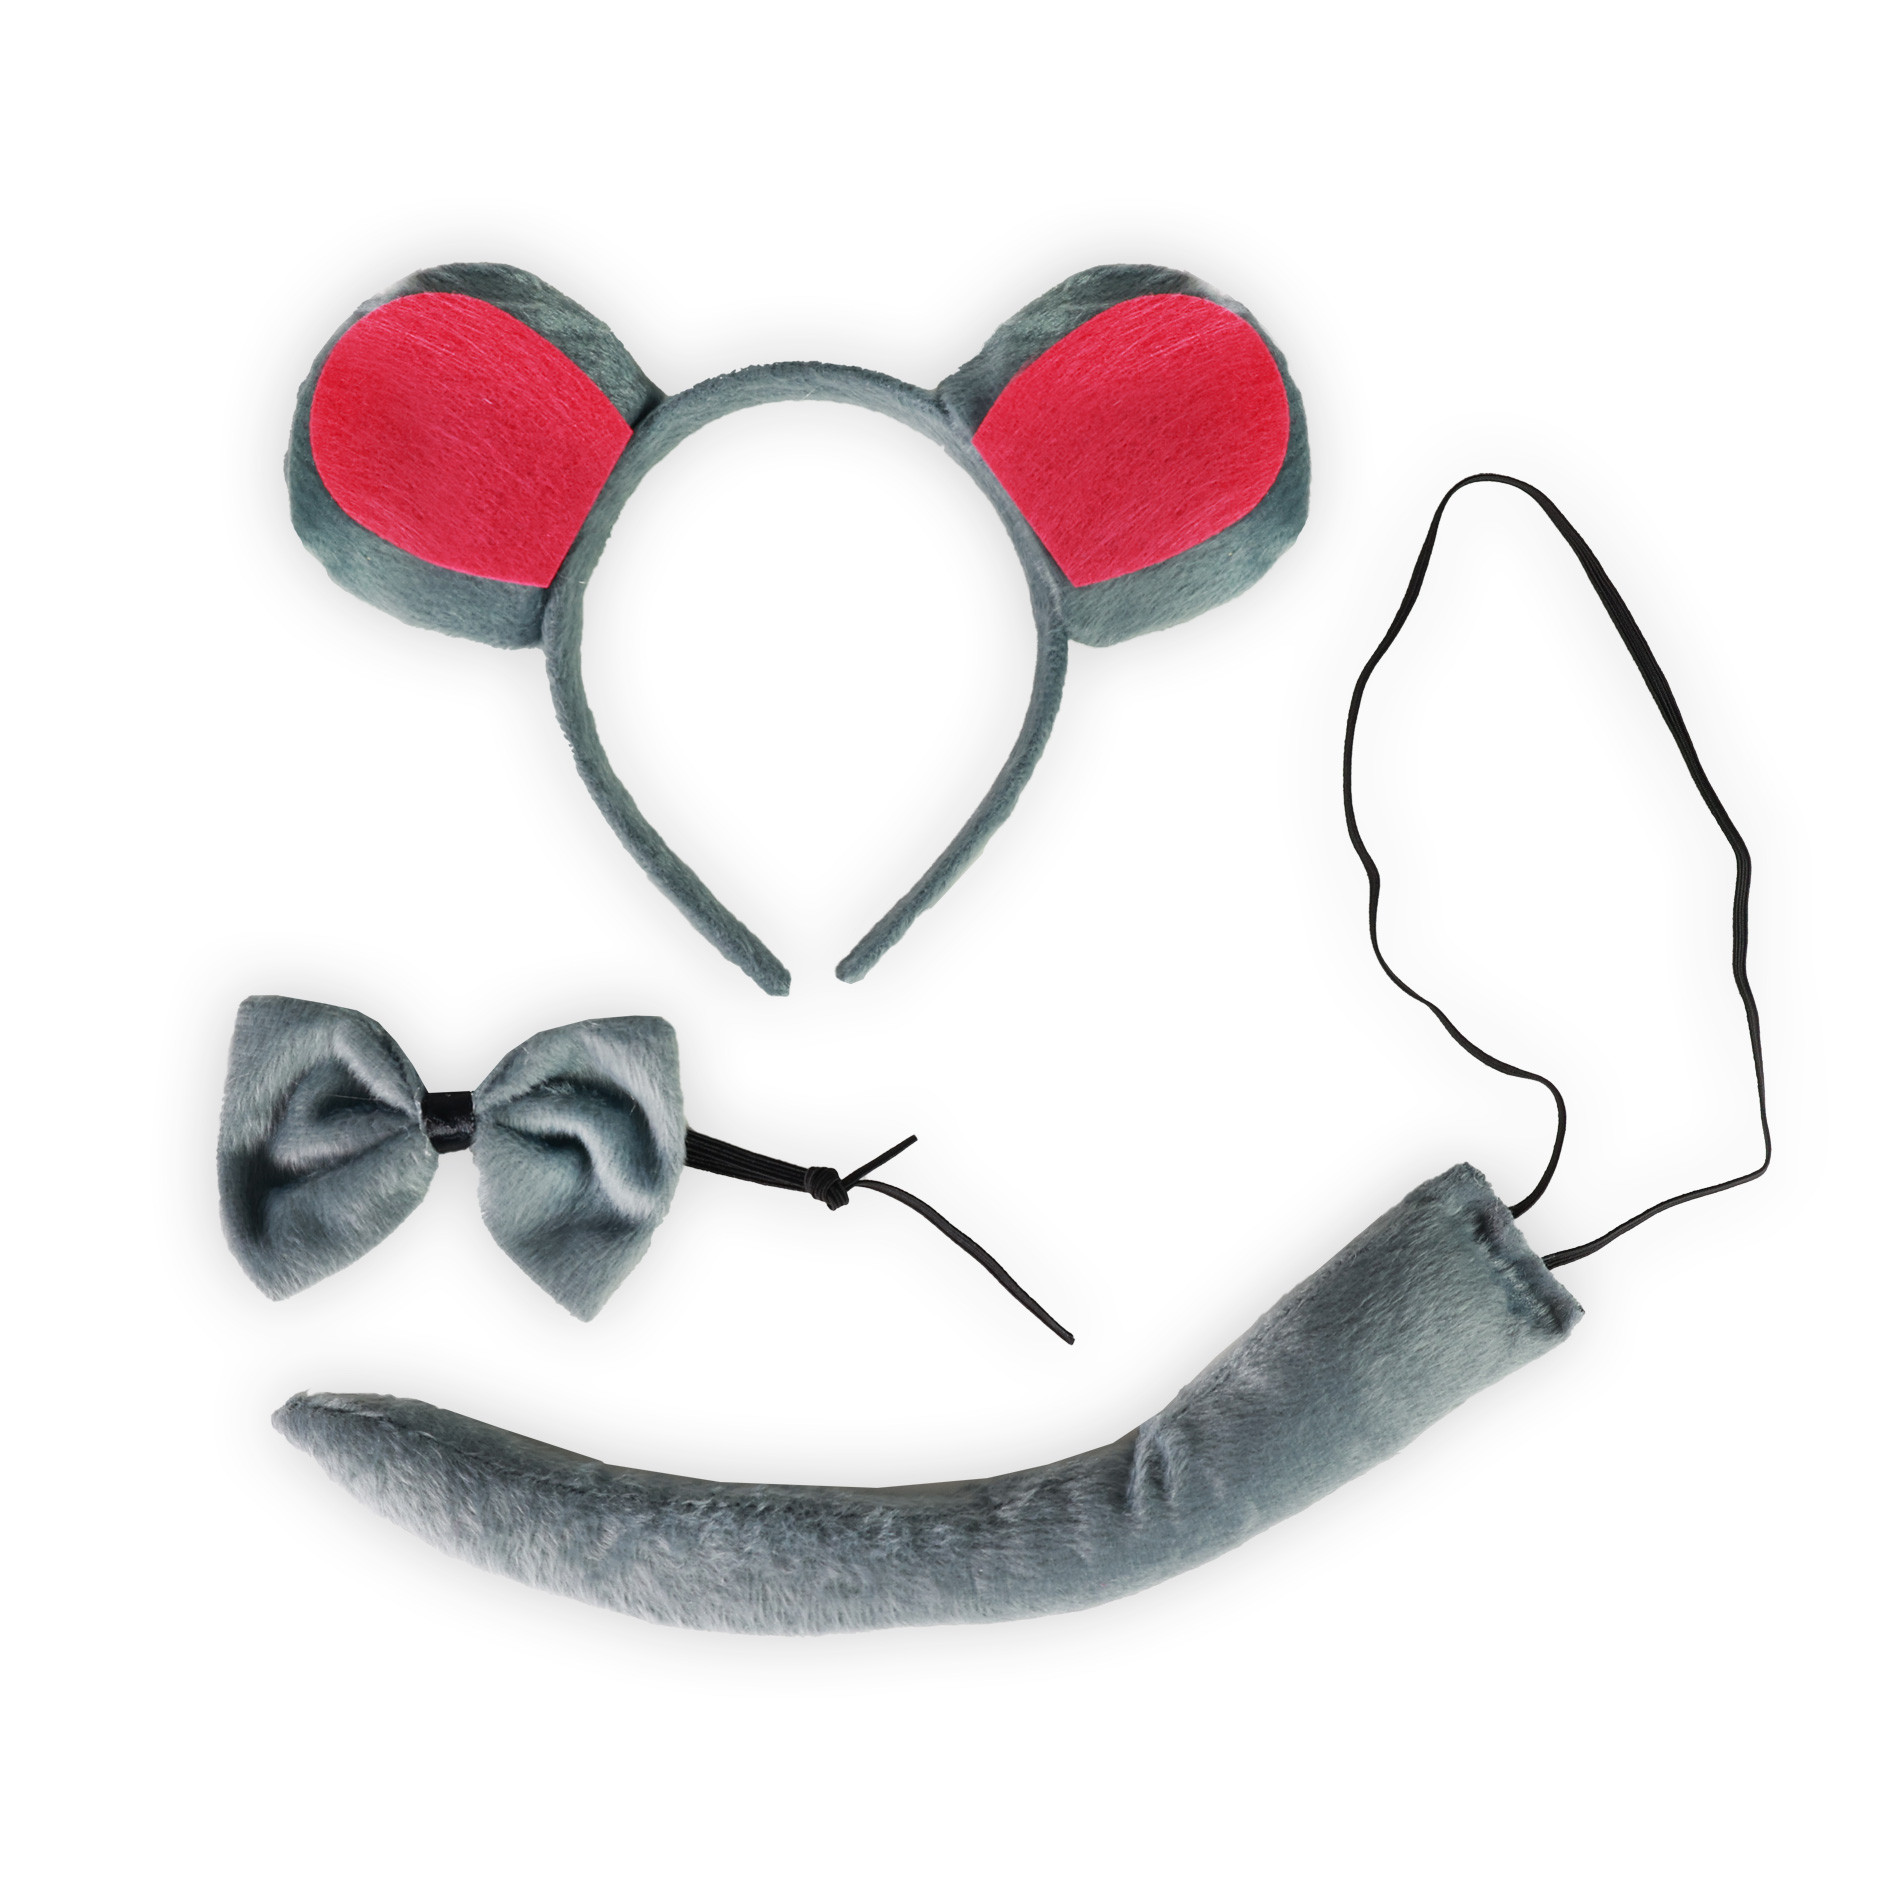 the set mouse w/ tail, headband, bow tie